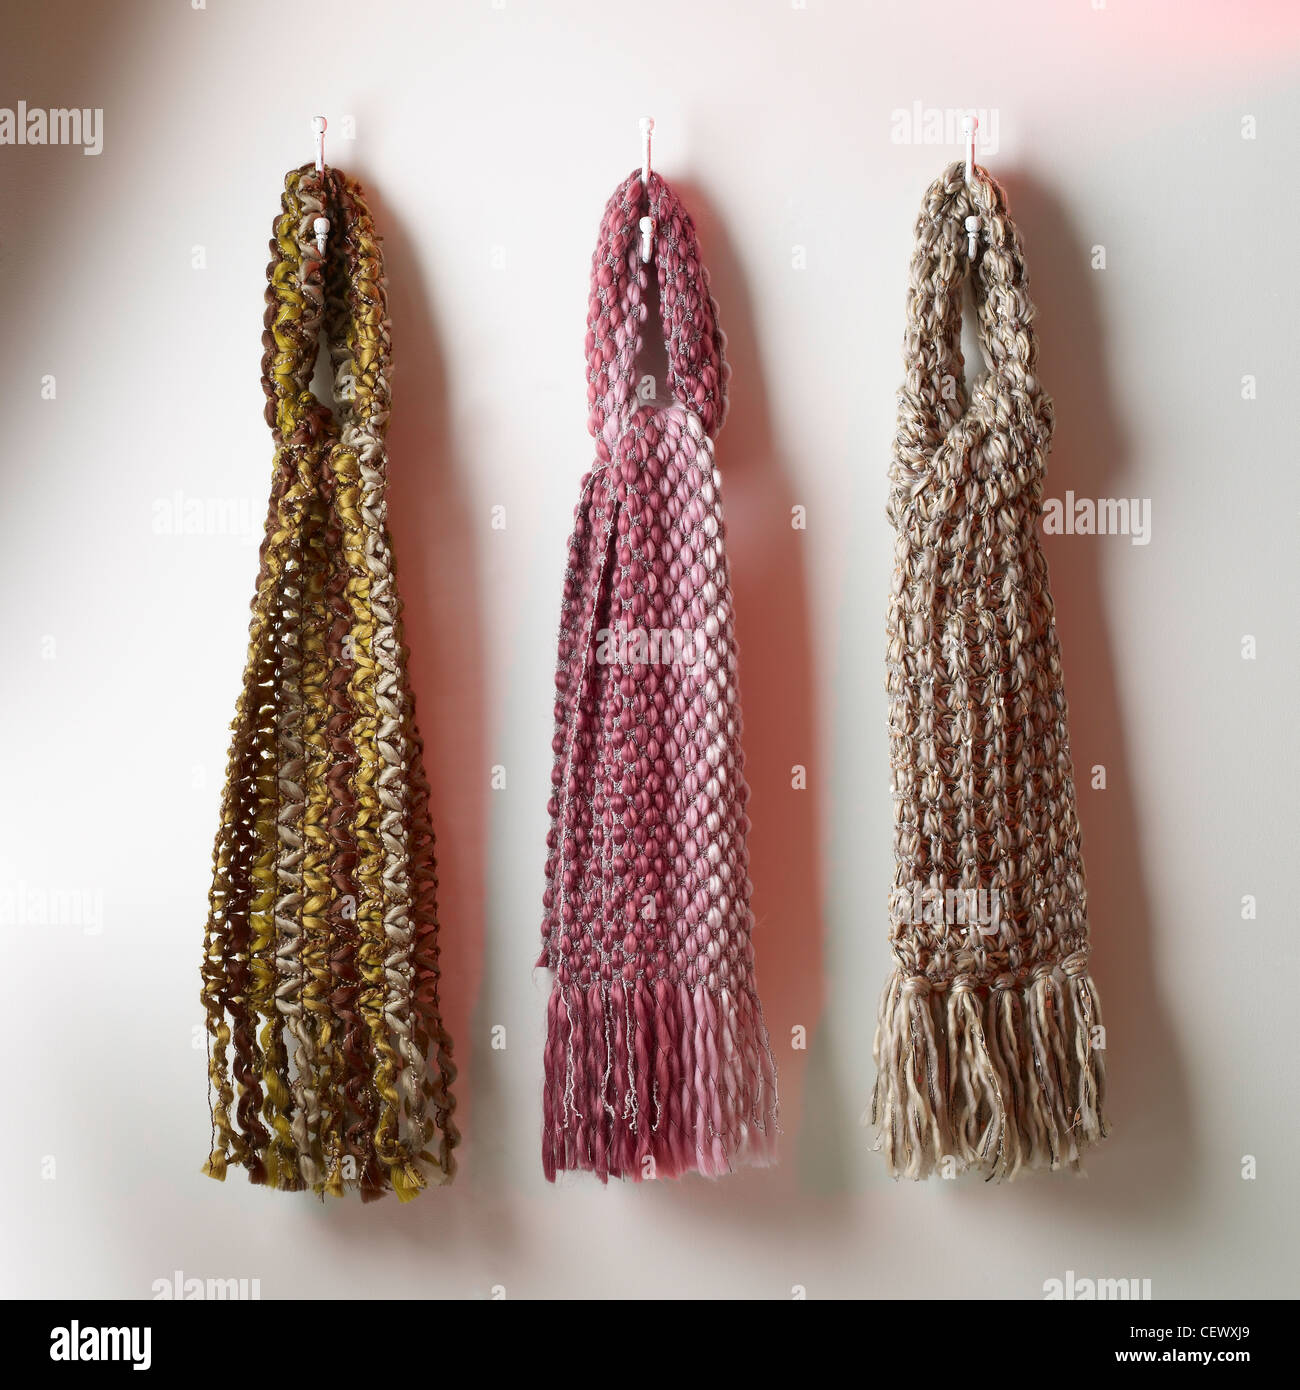 A still life shot of colourful wool scarves lined up on a plain background Stock Photo